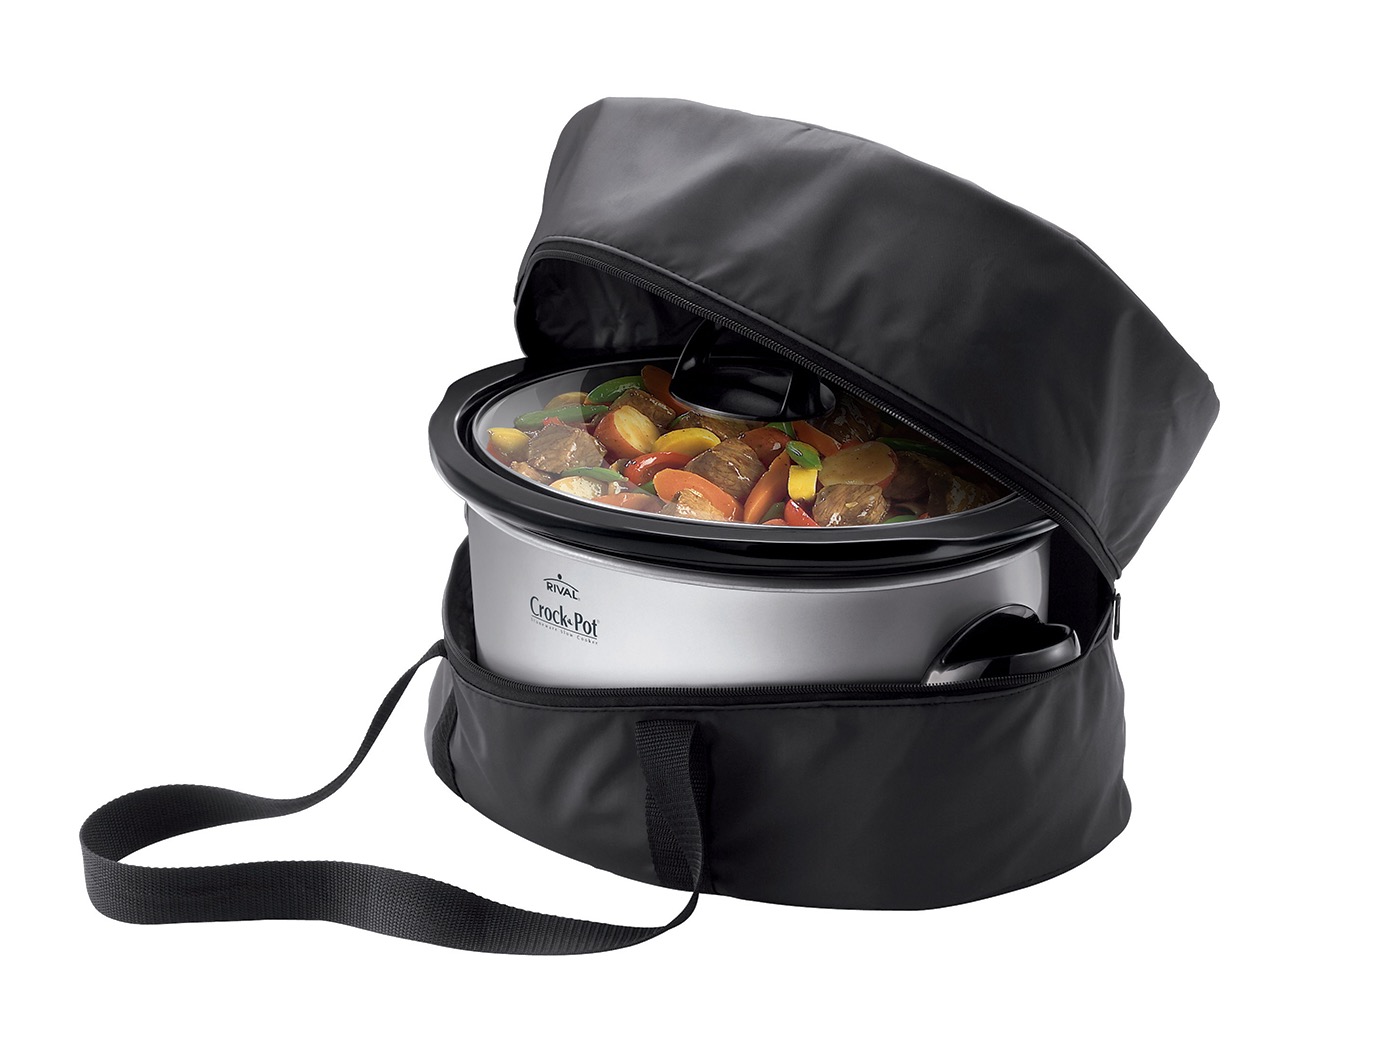 with a Bottom Pad and Lid Fasten Straps Bag Only Black Luxja Double Layers Slow Cooker Bag Insulated Slow Cooker Carrier Fits for Most 6-8 Quart Oval Slow Cooker 